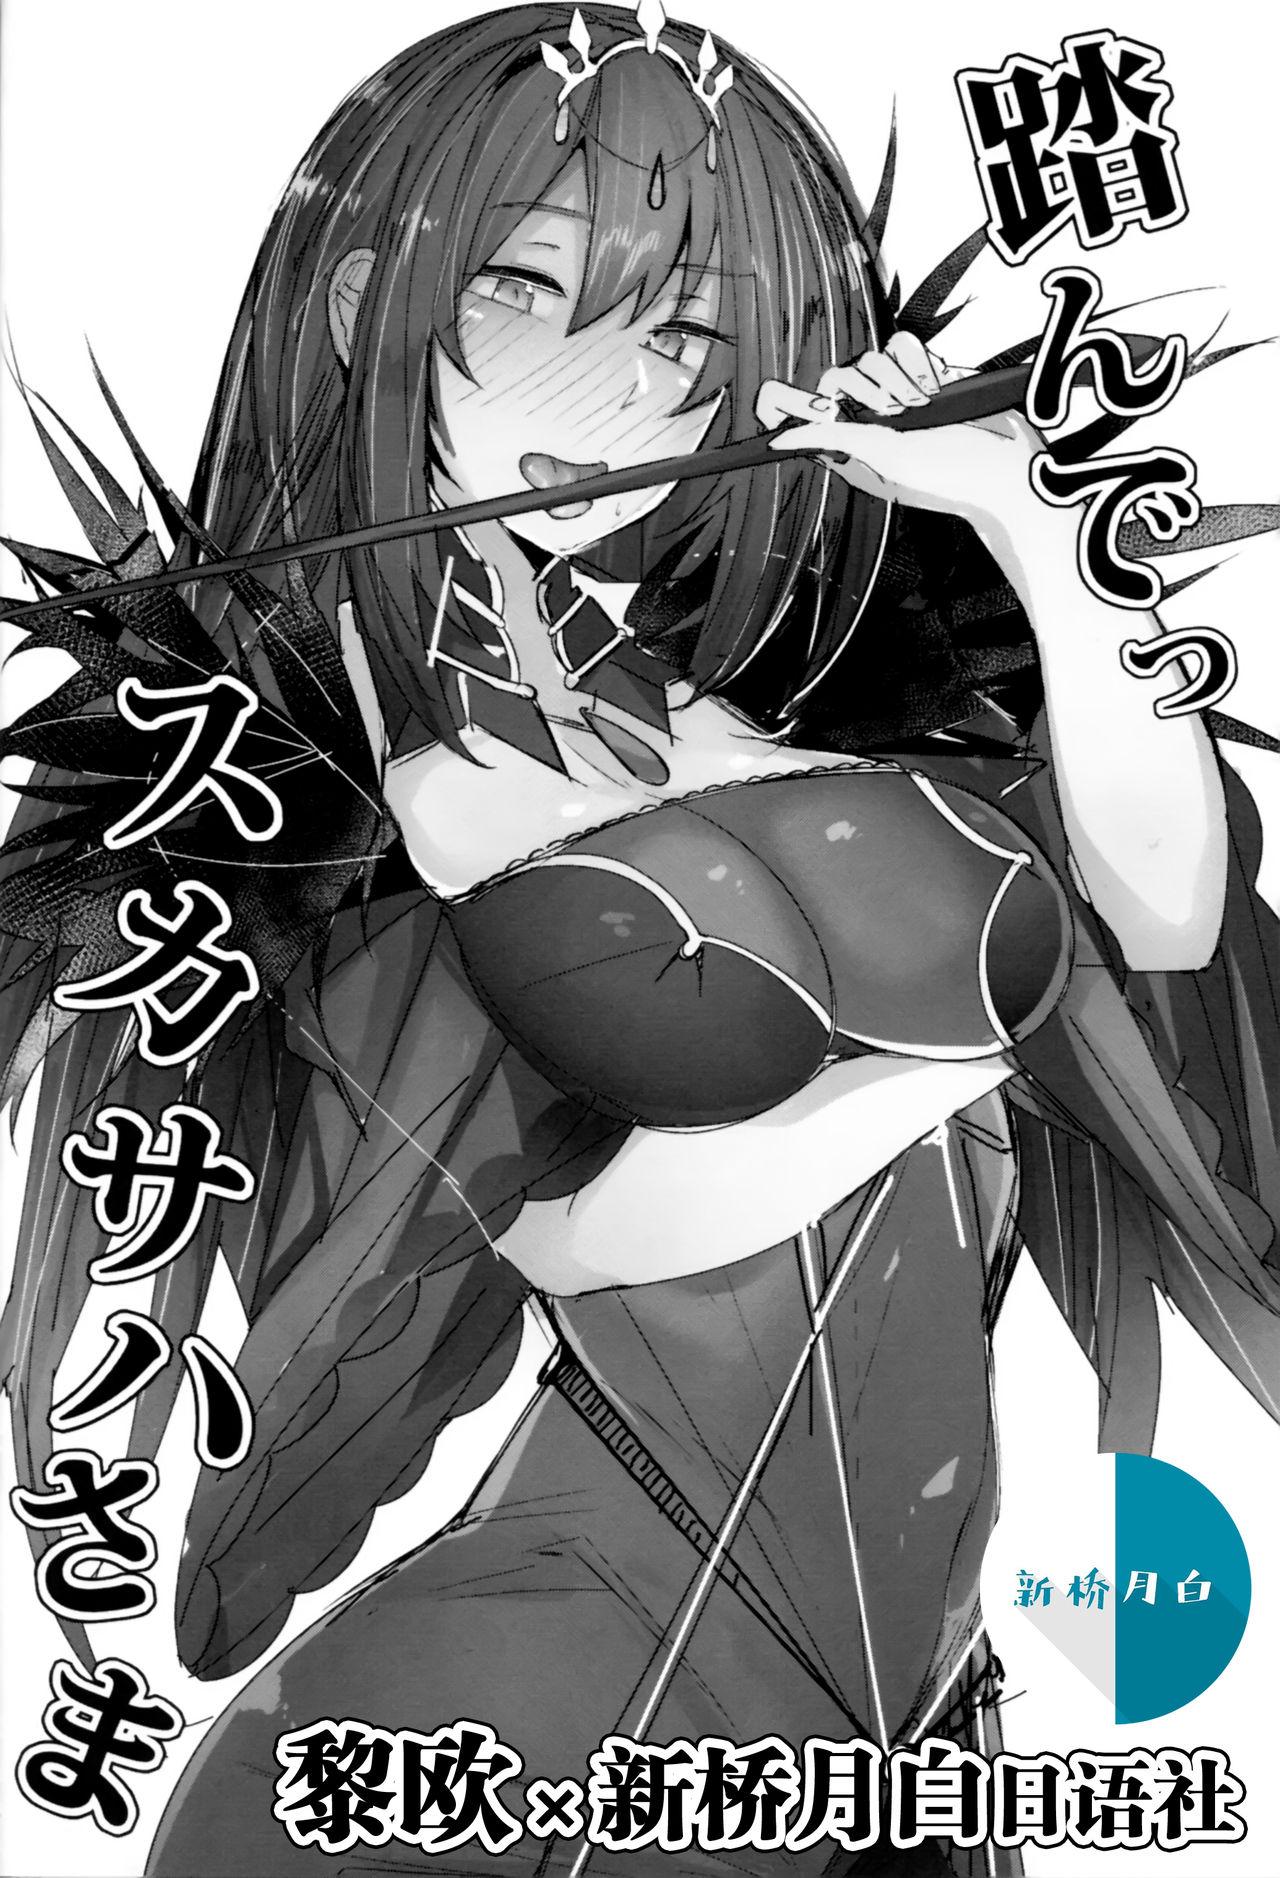 Bigcock Funde Scathach-sama - Fate grand order Pure18 - Page 1